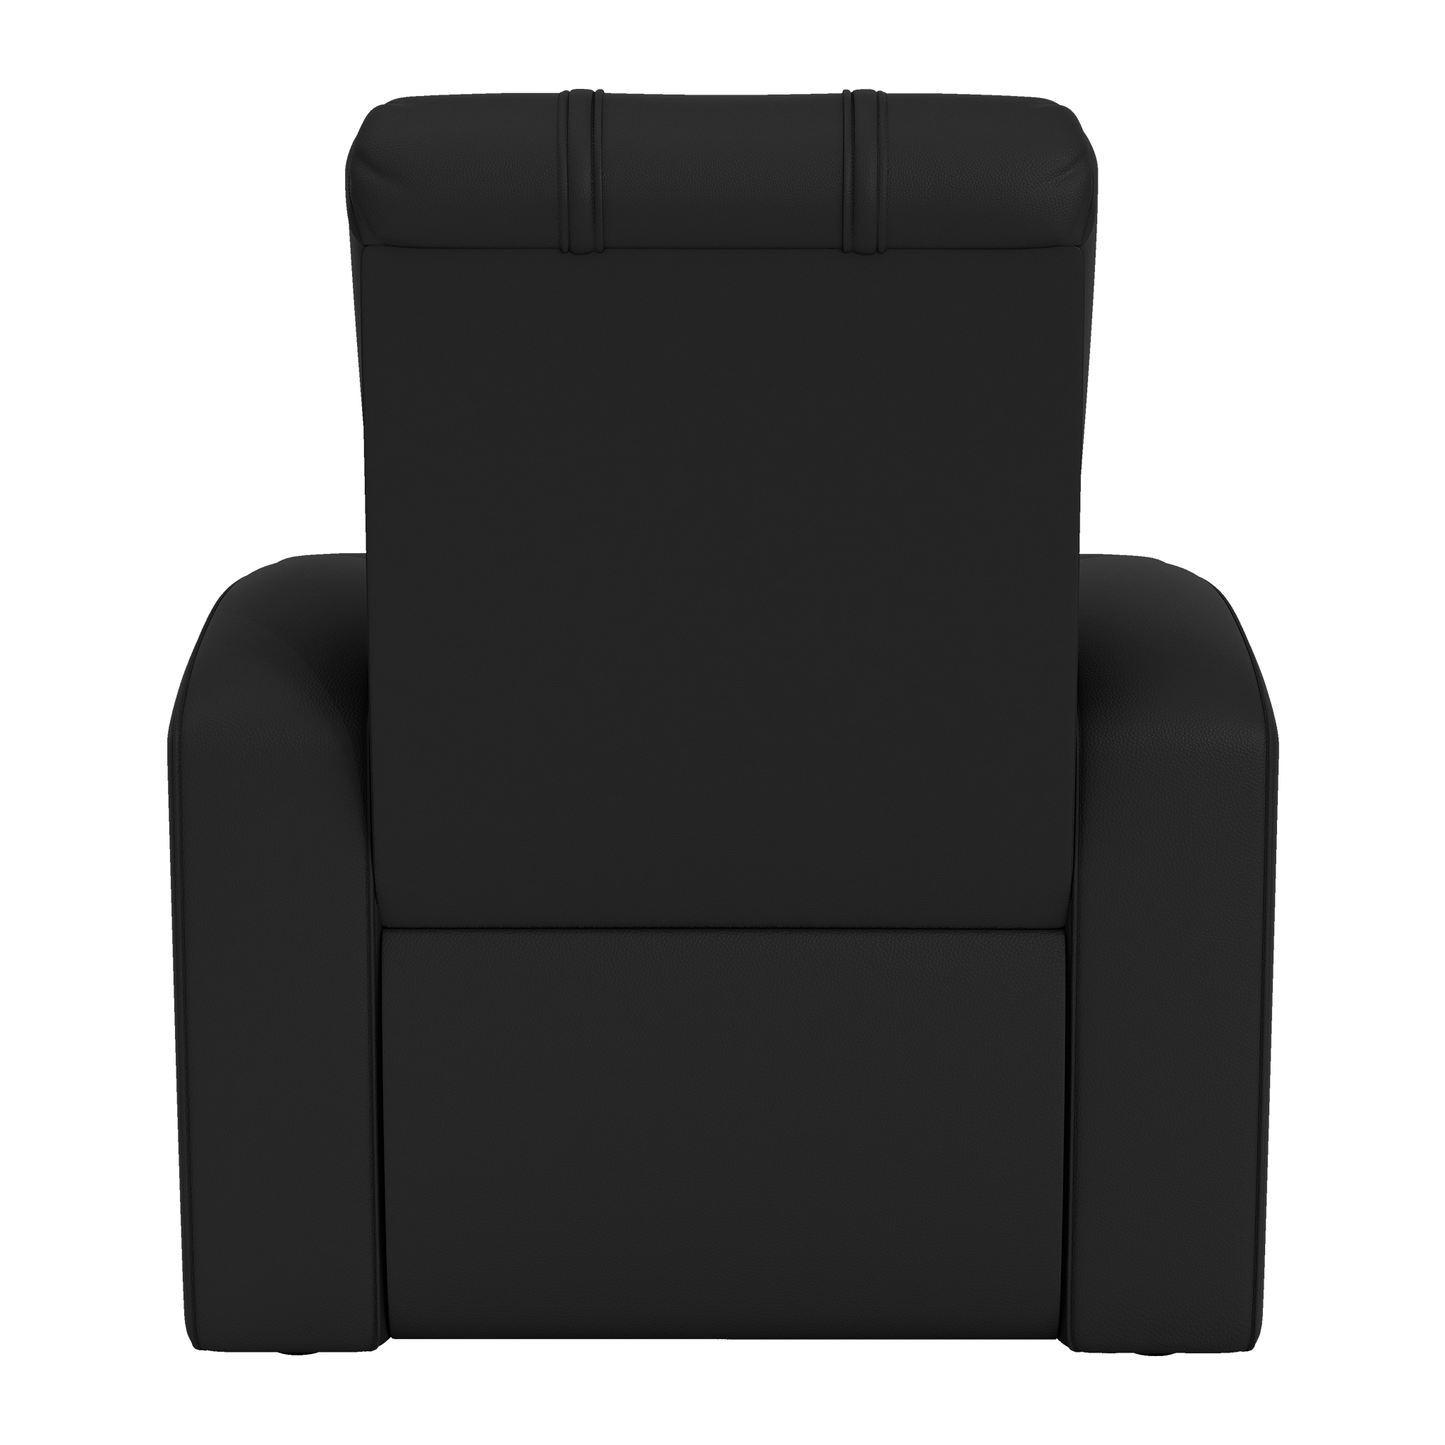 Relax Home Theater Recliner with Minnesota Golden Gophers Secondary Logo